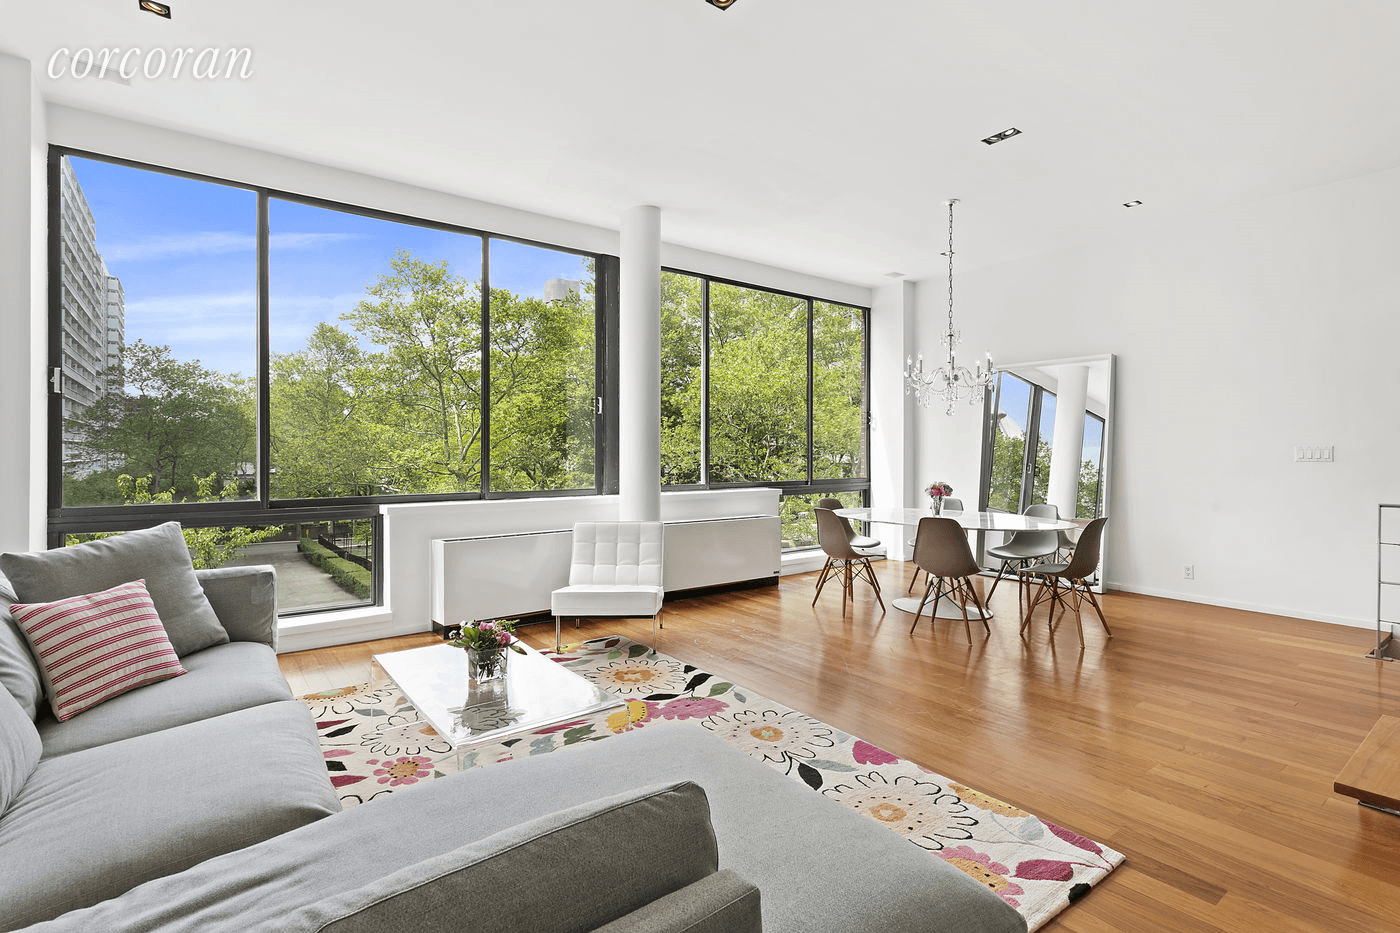 Welcome to 77 Bleecker, Residence 306 307, a sun drenched, chic and cheerful 3 bed 3 bath loft and a beautiful blend of natural light, air, and cohesive flow.